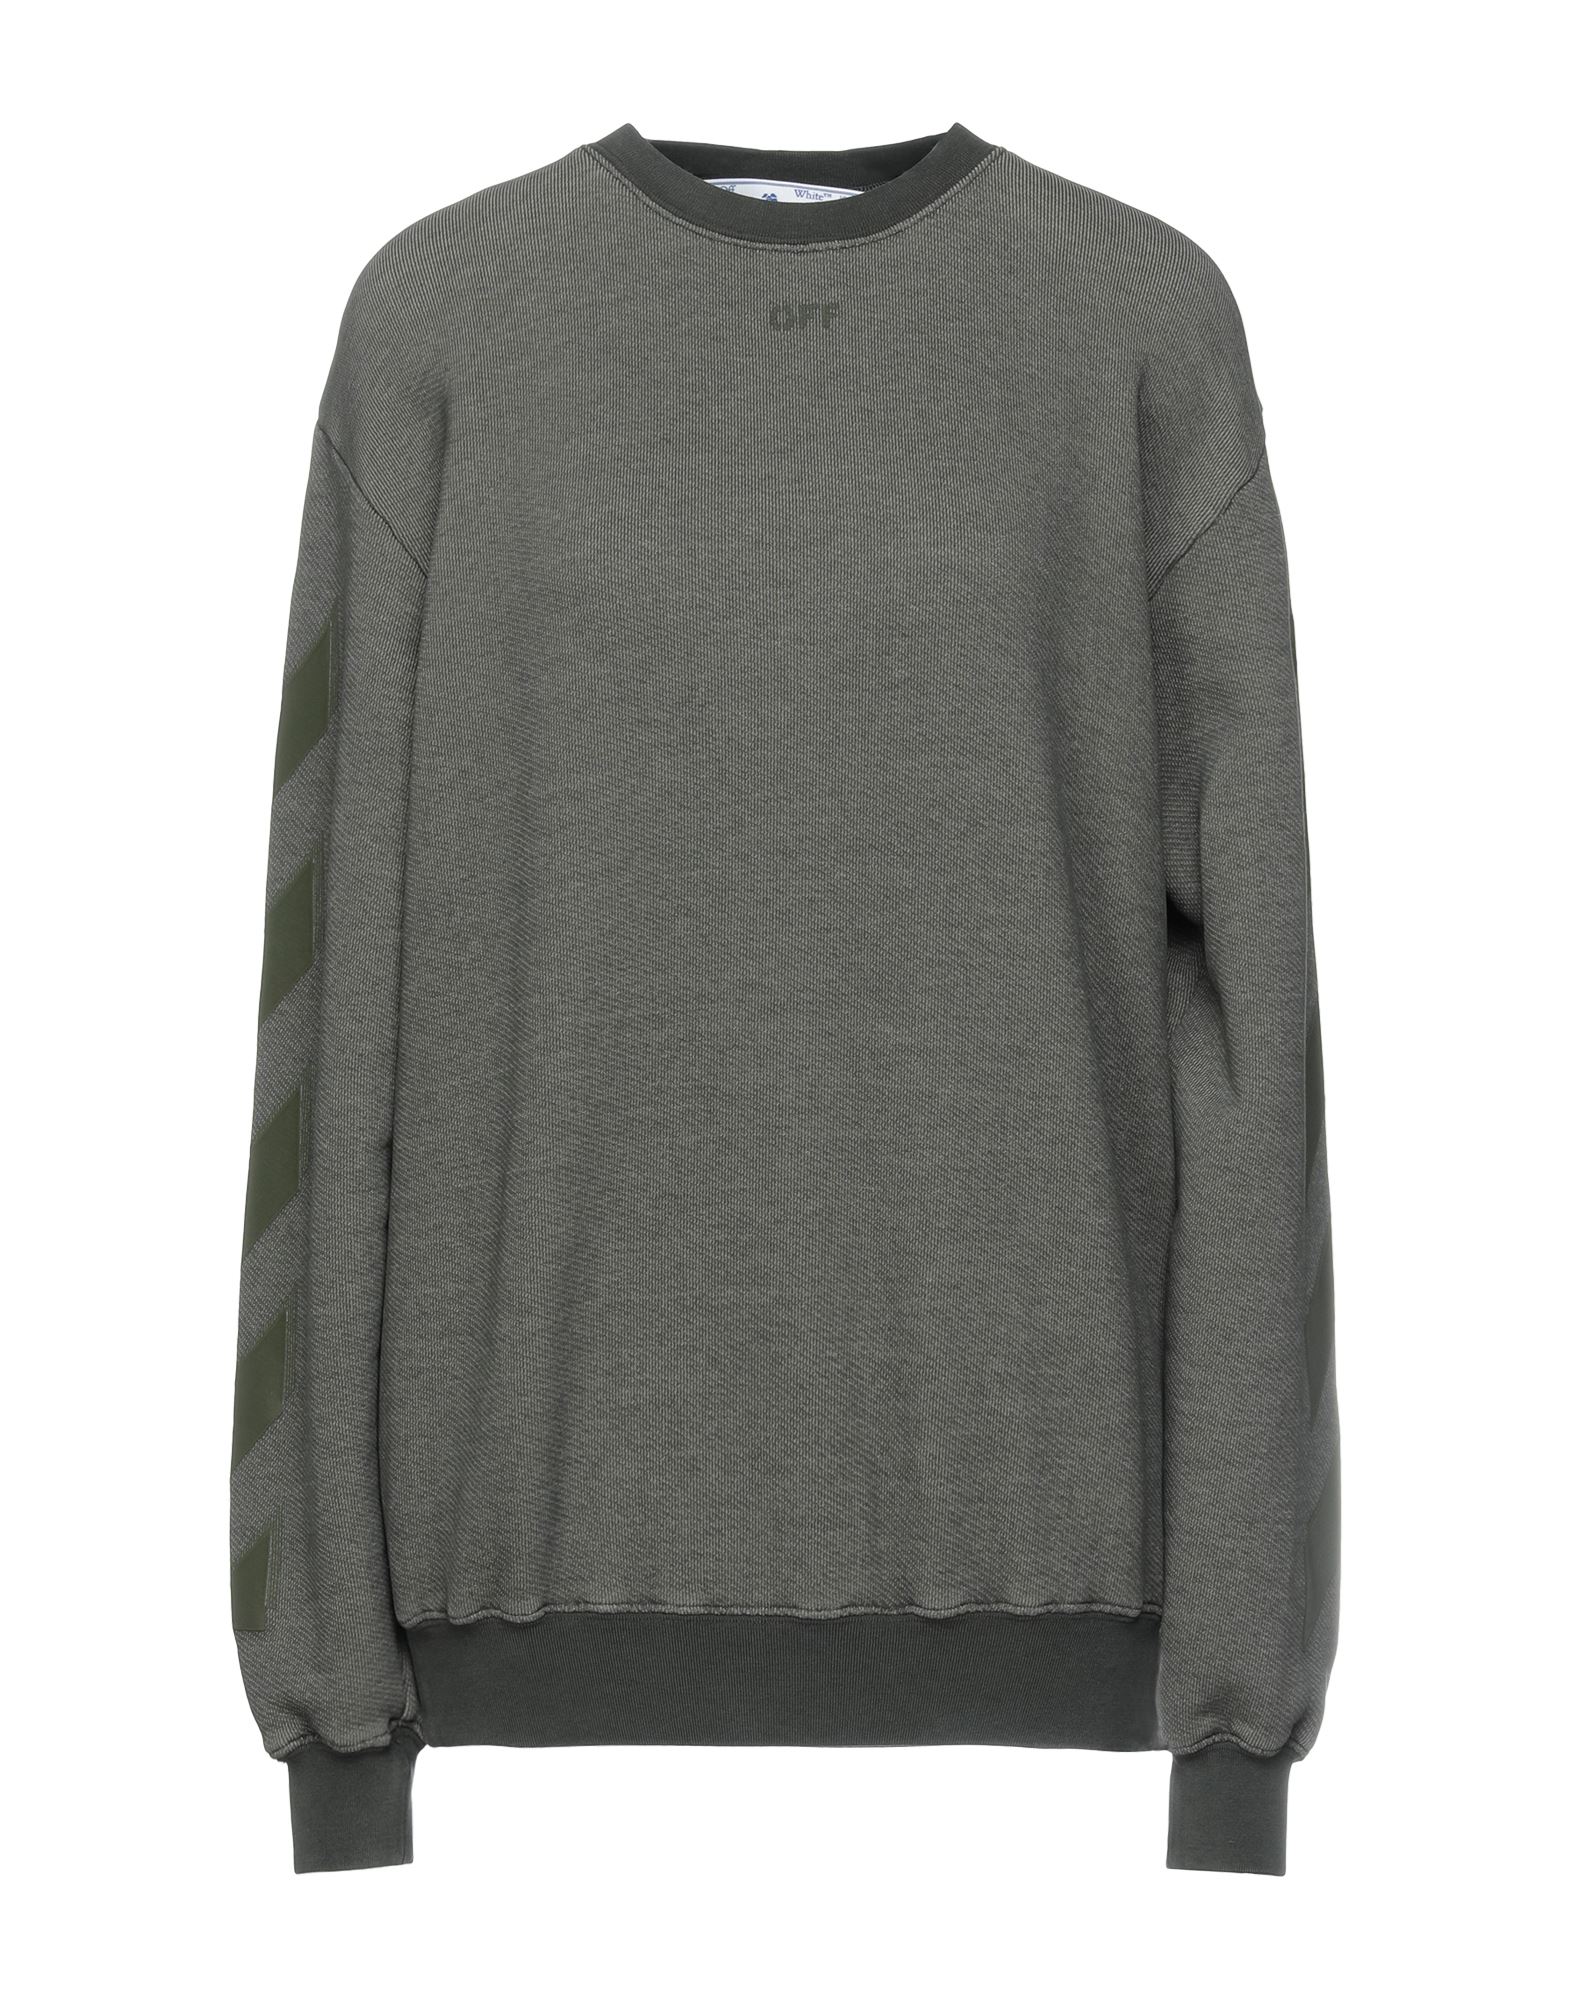 Off-white &trade; Sweatshirts In Military Green